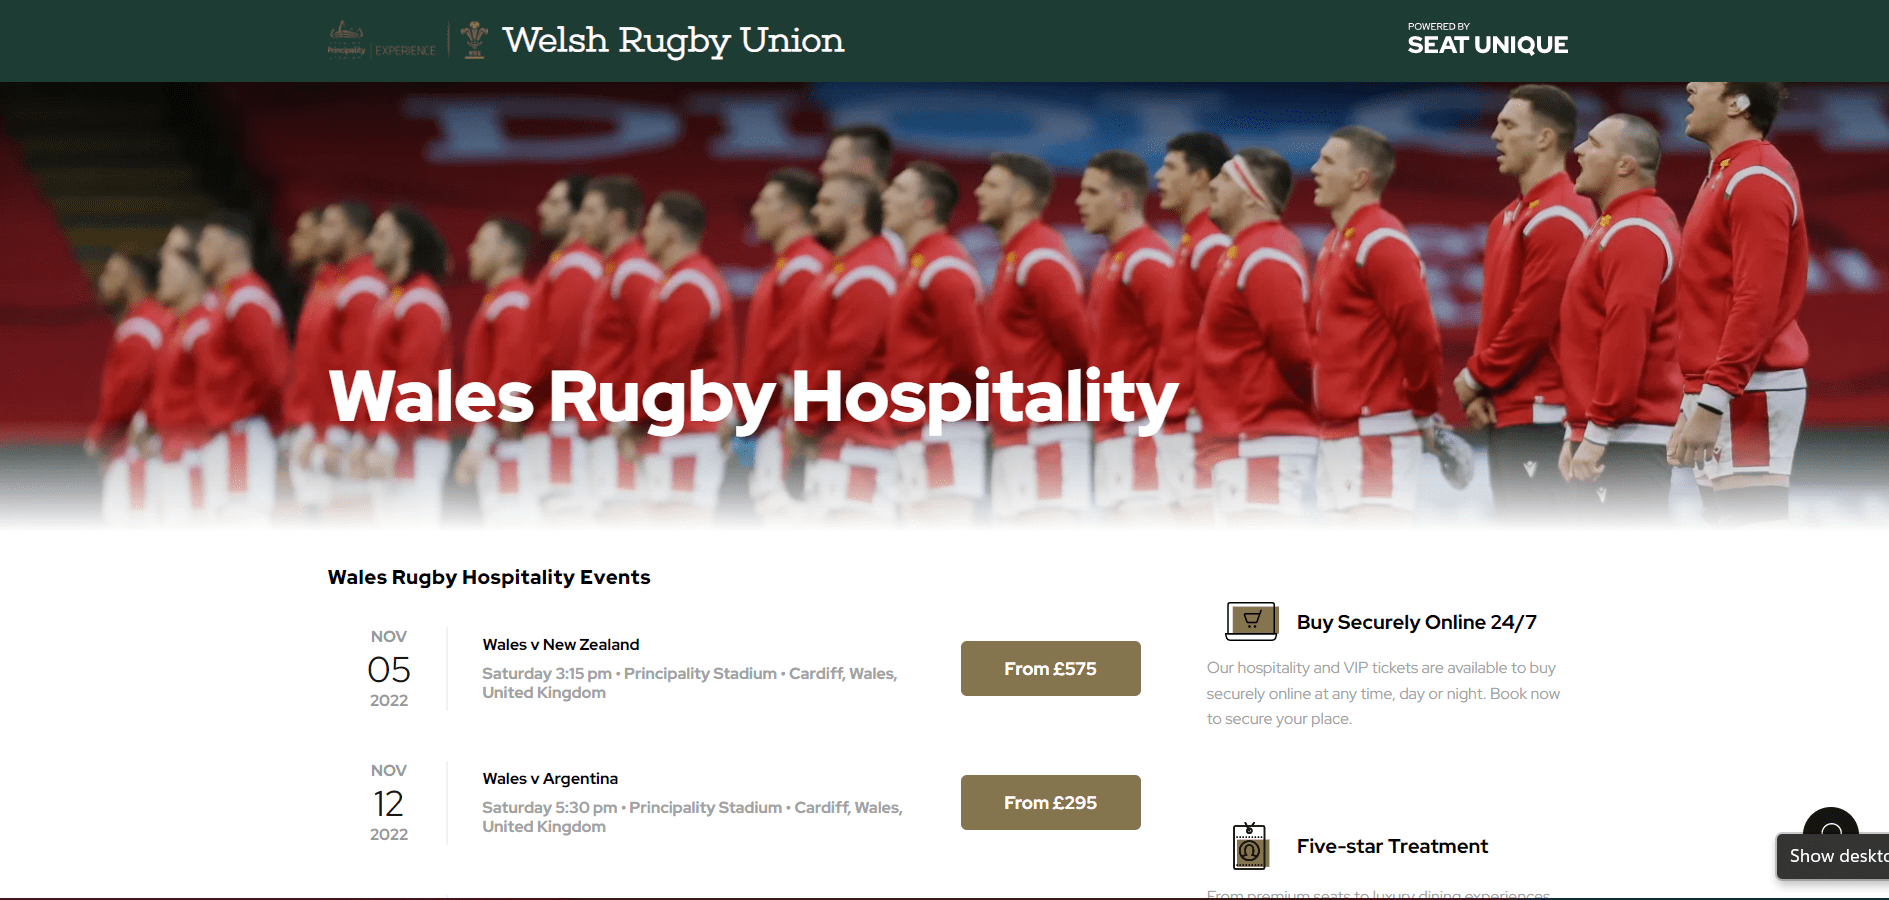 Welsh Rugby Union white label website powered by Seat Unique